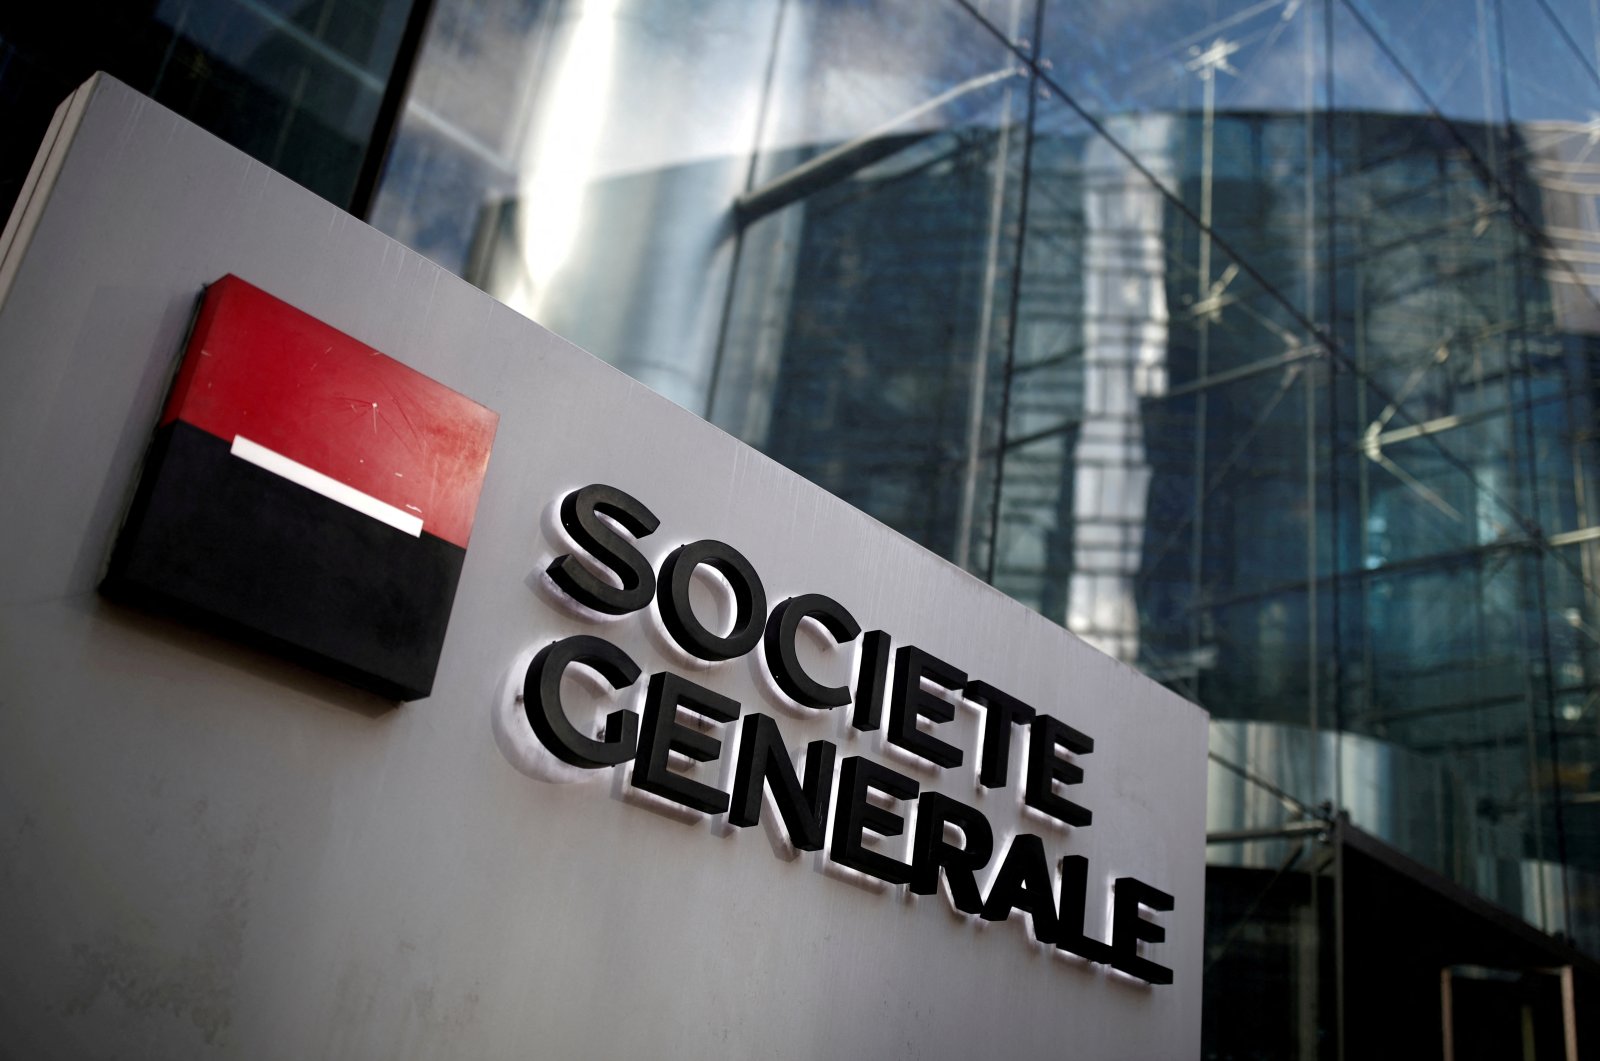 The logo of Societe Generale is seen on the headquarters at the financial and business district of La Defense near Paris, France, Feb. 4, 2020. (Reuters Photo)